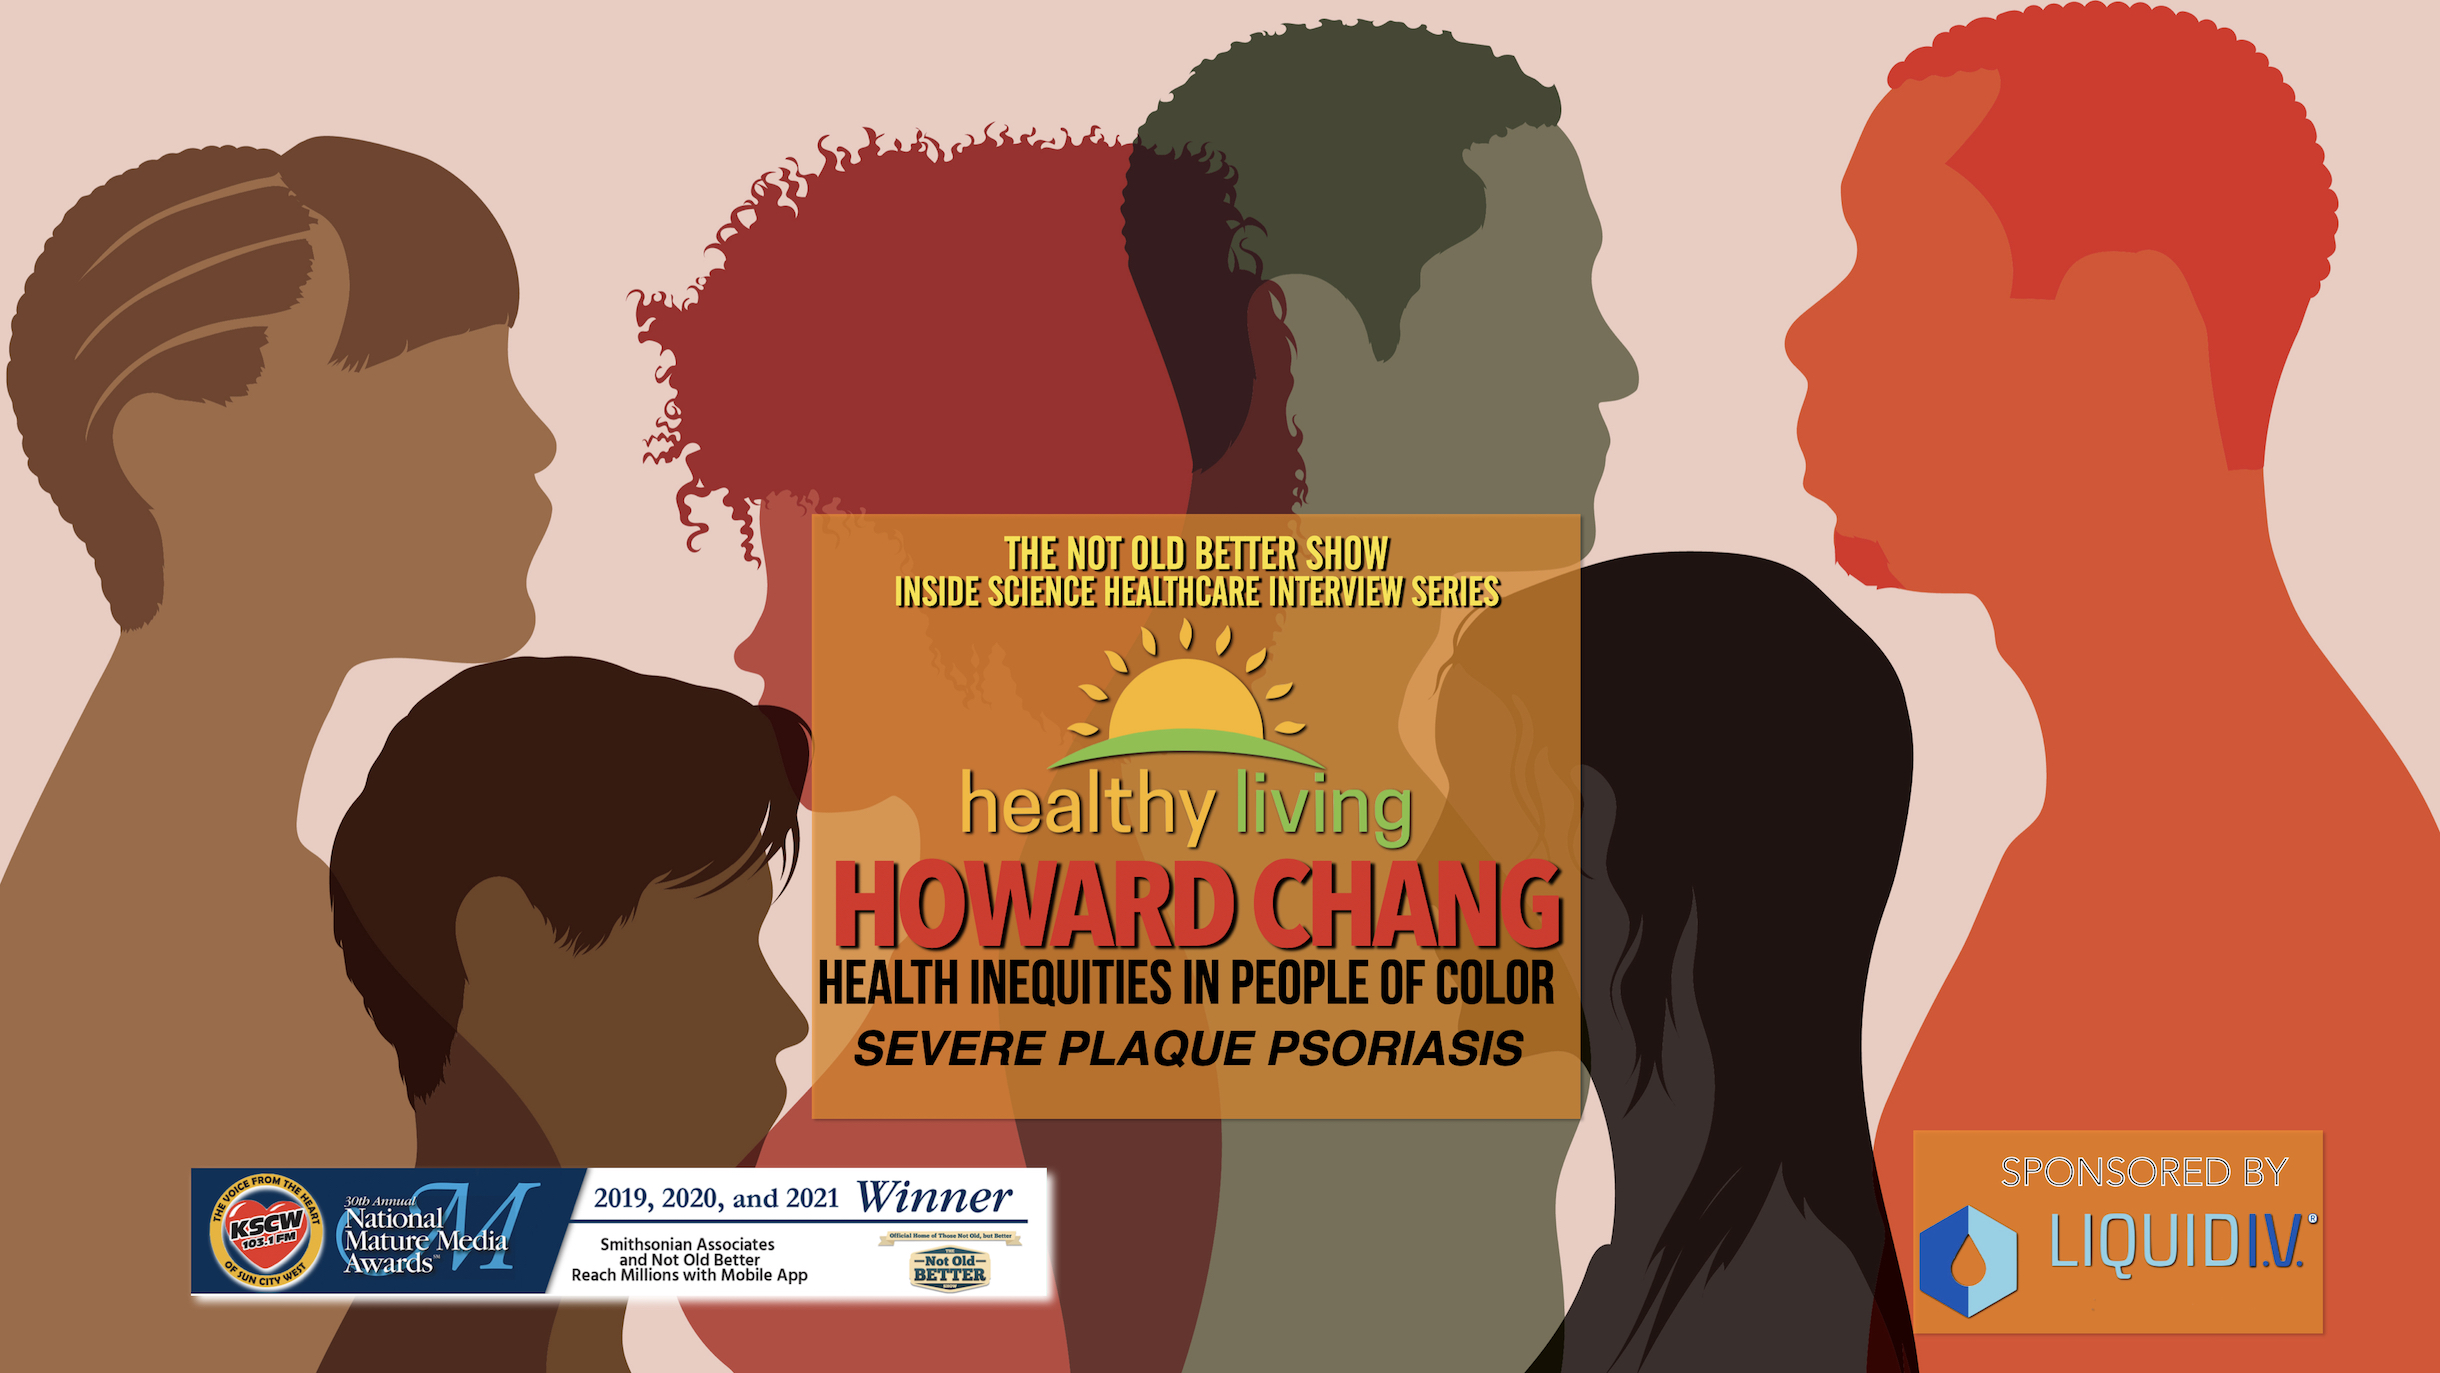 Journey to Wellness: Dr. Howard Chang’s 40-Year Battle with Psoriasis and His Mission to Address Healthcare Inequities Among People of Color